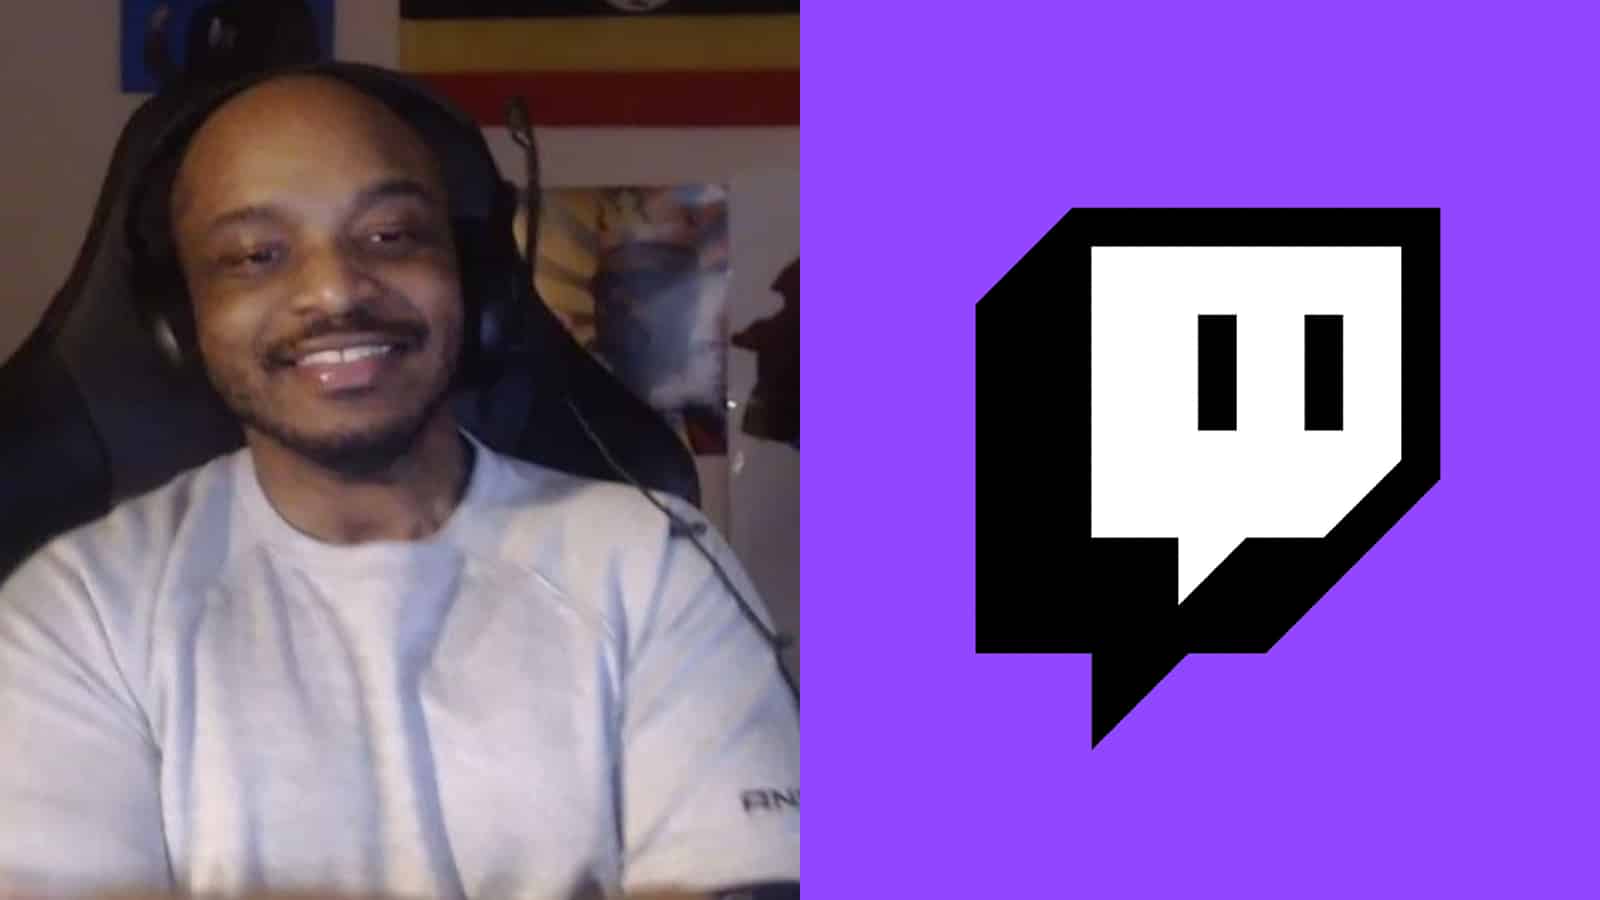 Streamer hits out at Twitch after receiving DMCA strike on 4-year-old deleted VOD